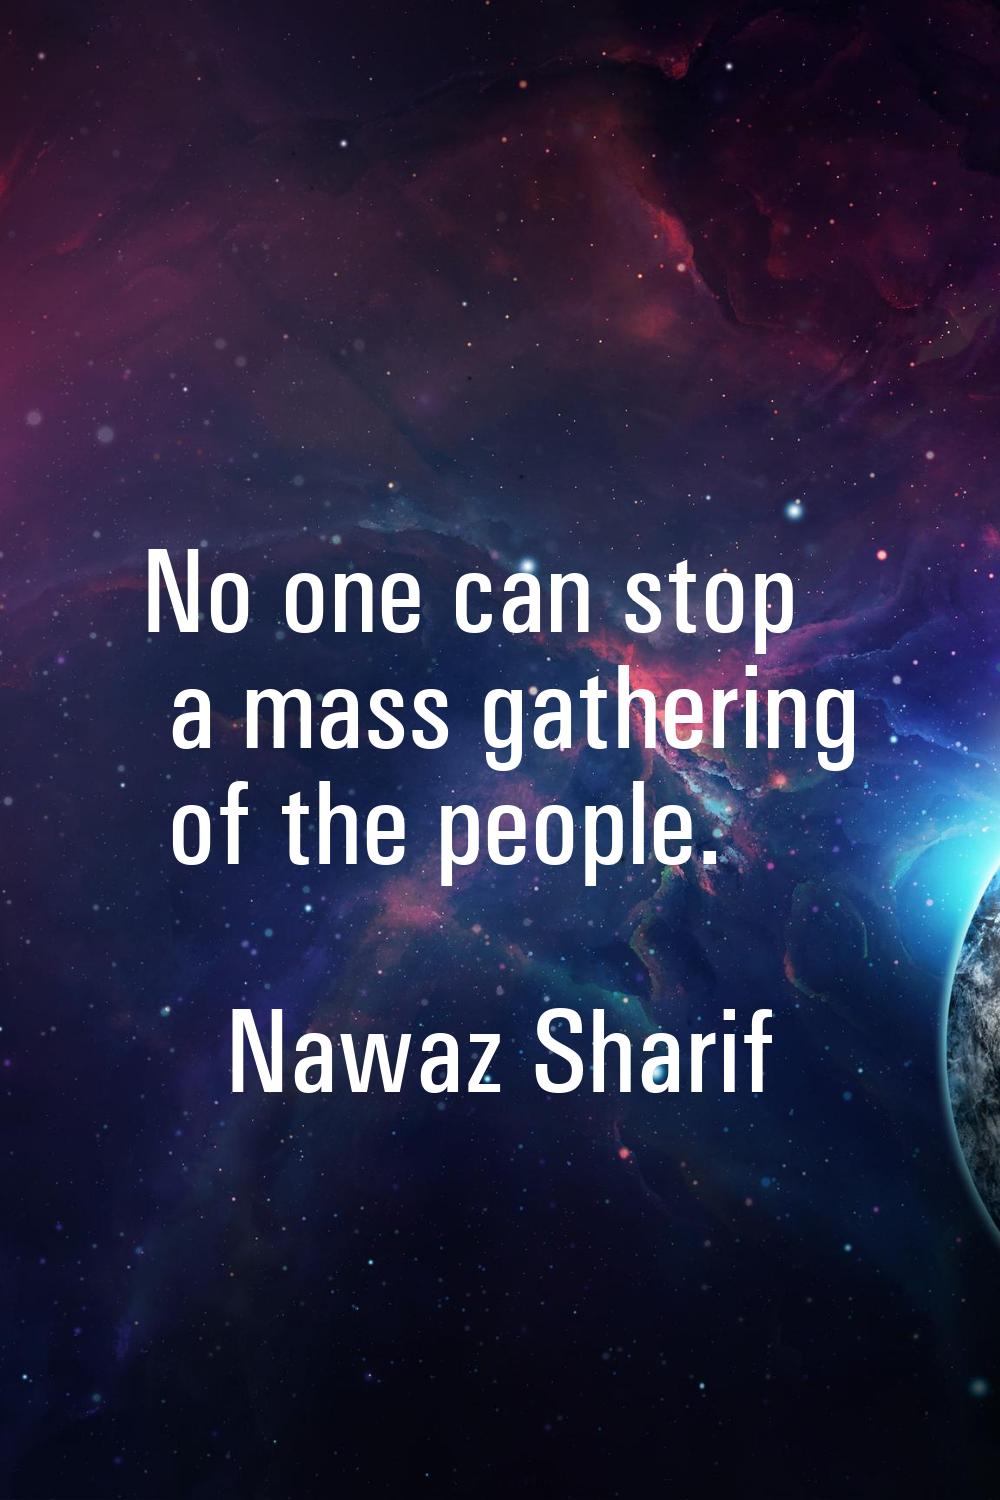 No one can stop a mass gathering of the people.